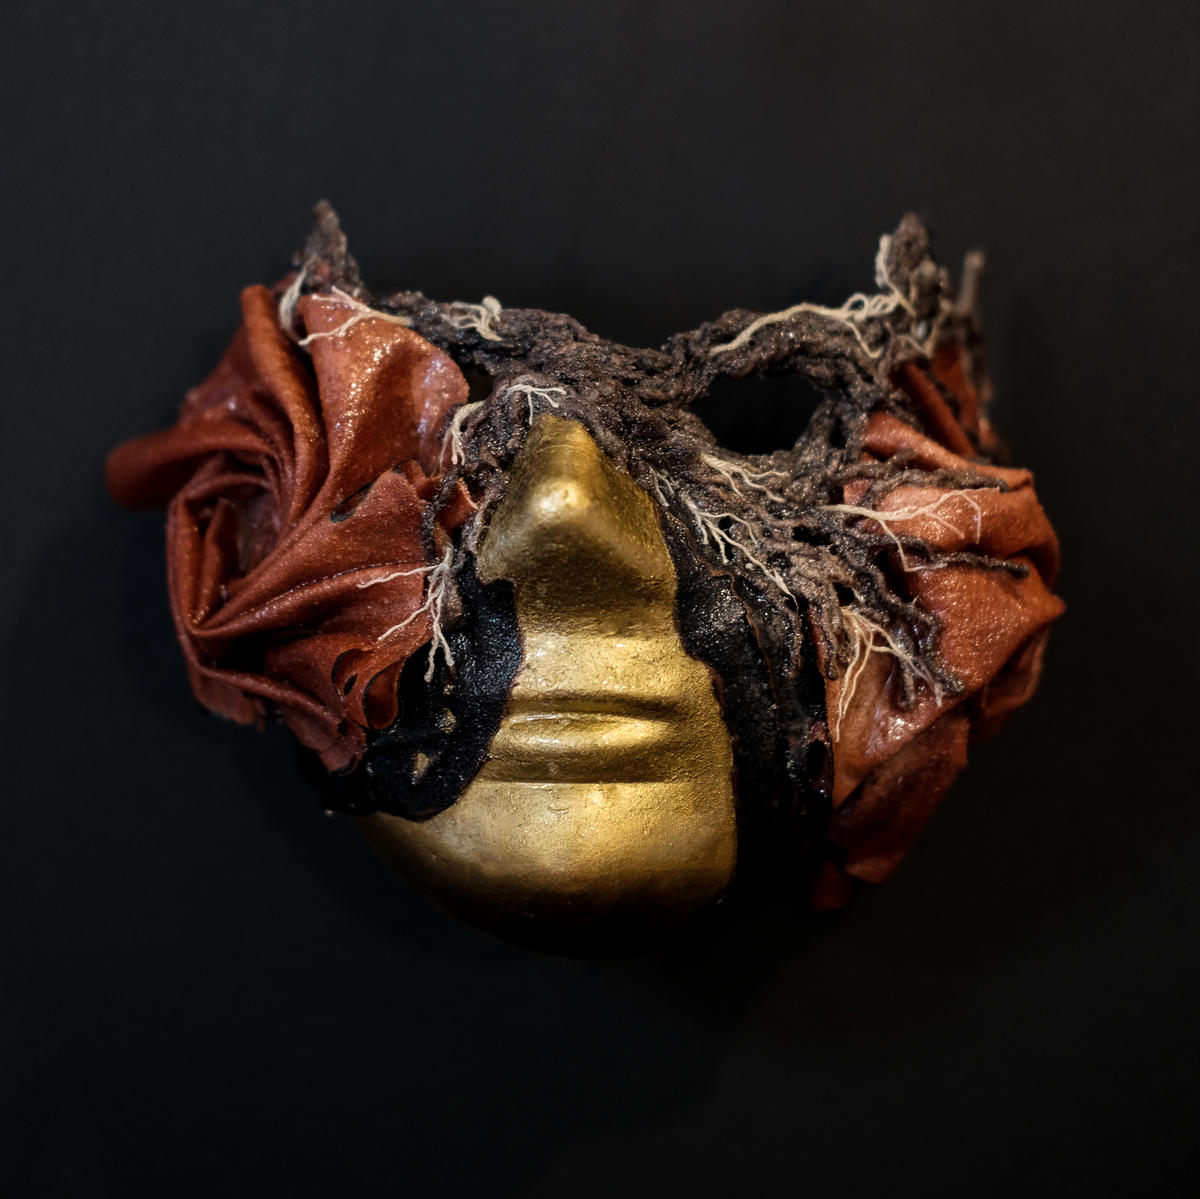 3D artwork, a masquerade mask made of gold material and red fabric manipulated into swirling, folding shapes